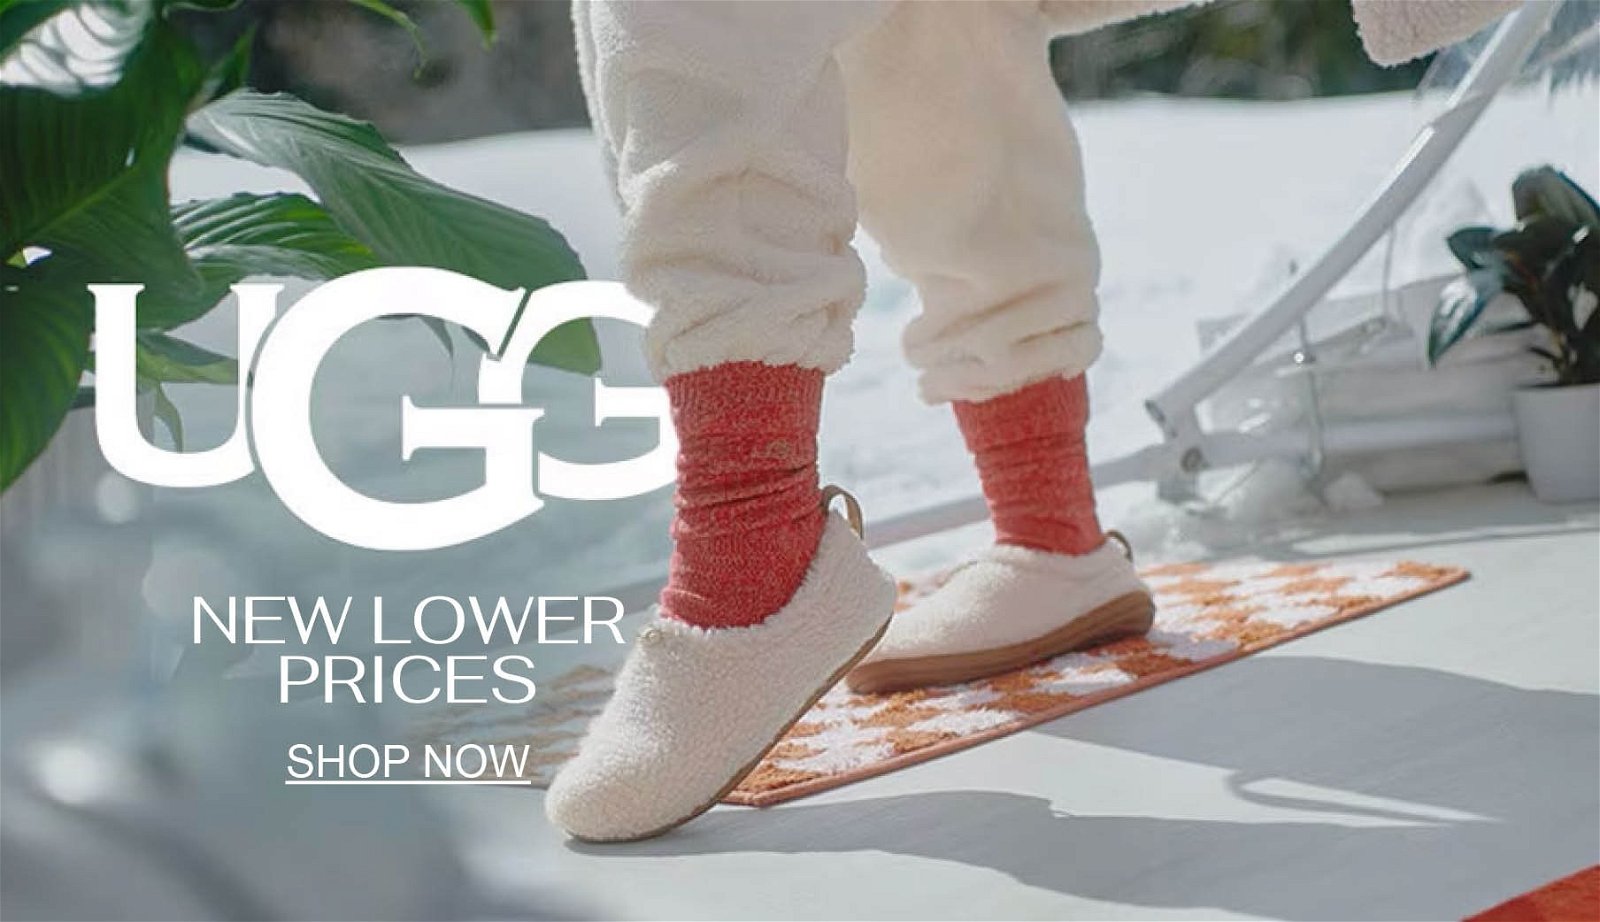 UGG, New Lower Prices, Shop Now